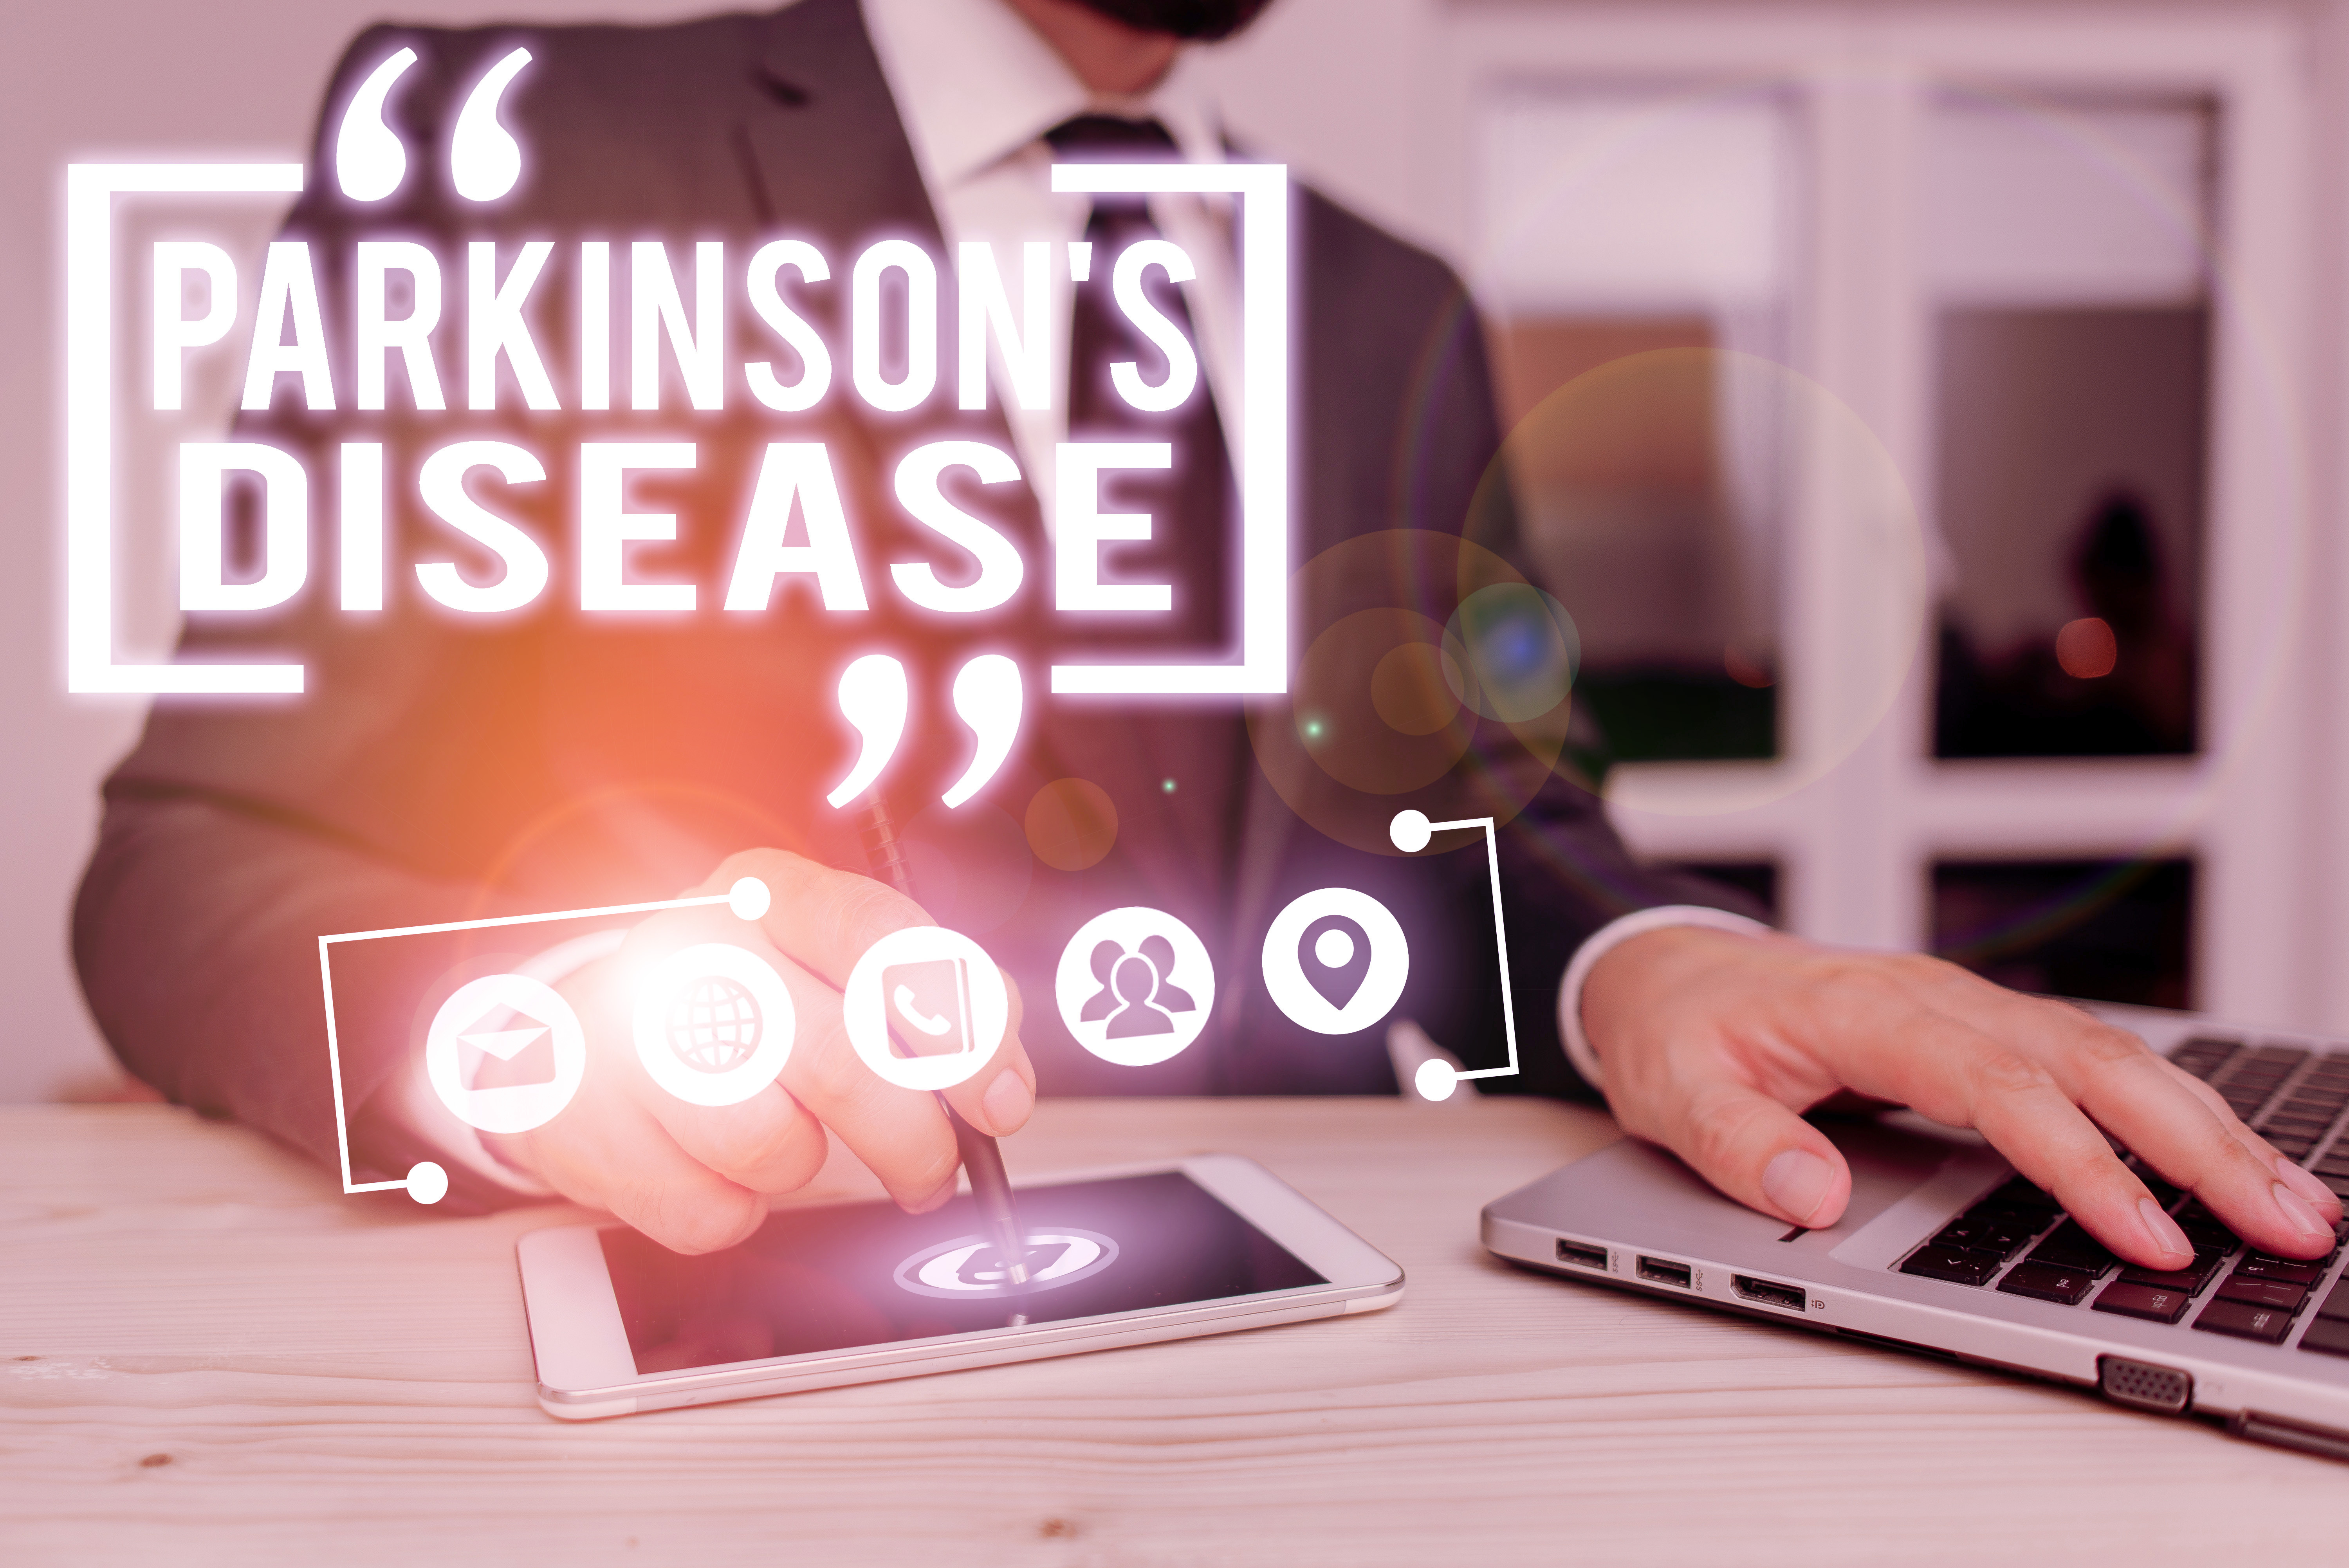 Parkinson's disease and movement disorders